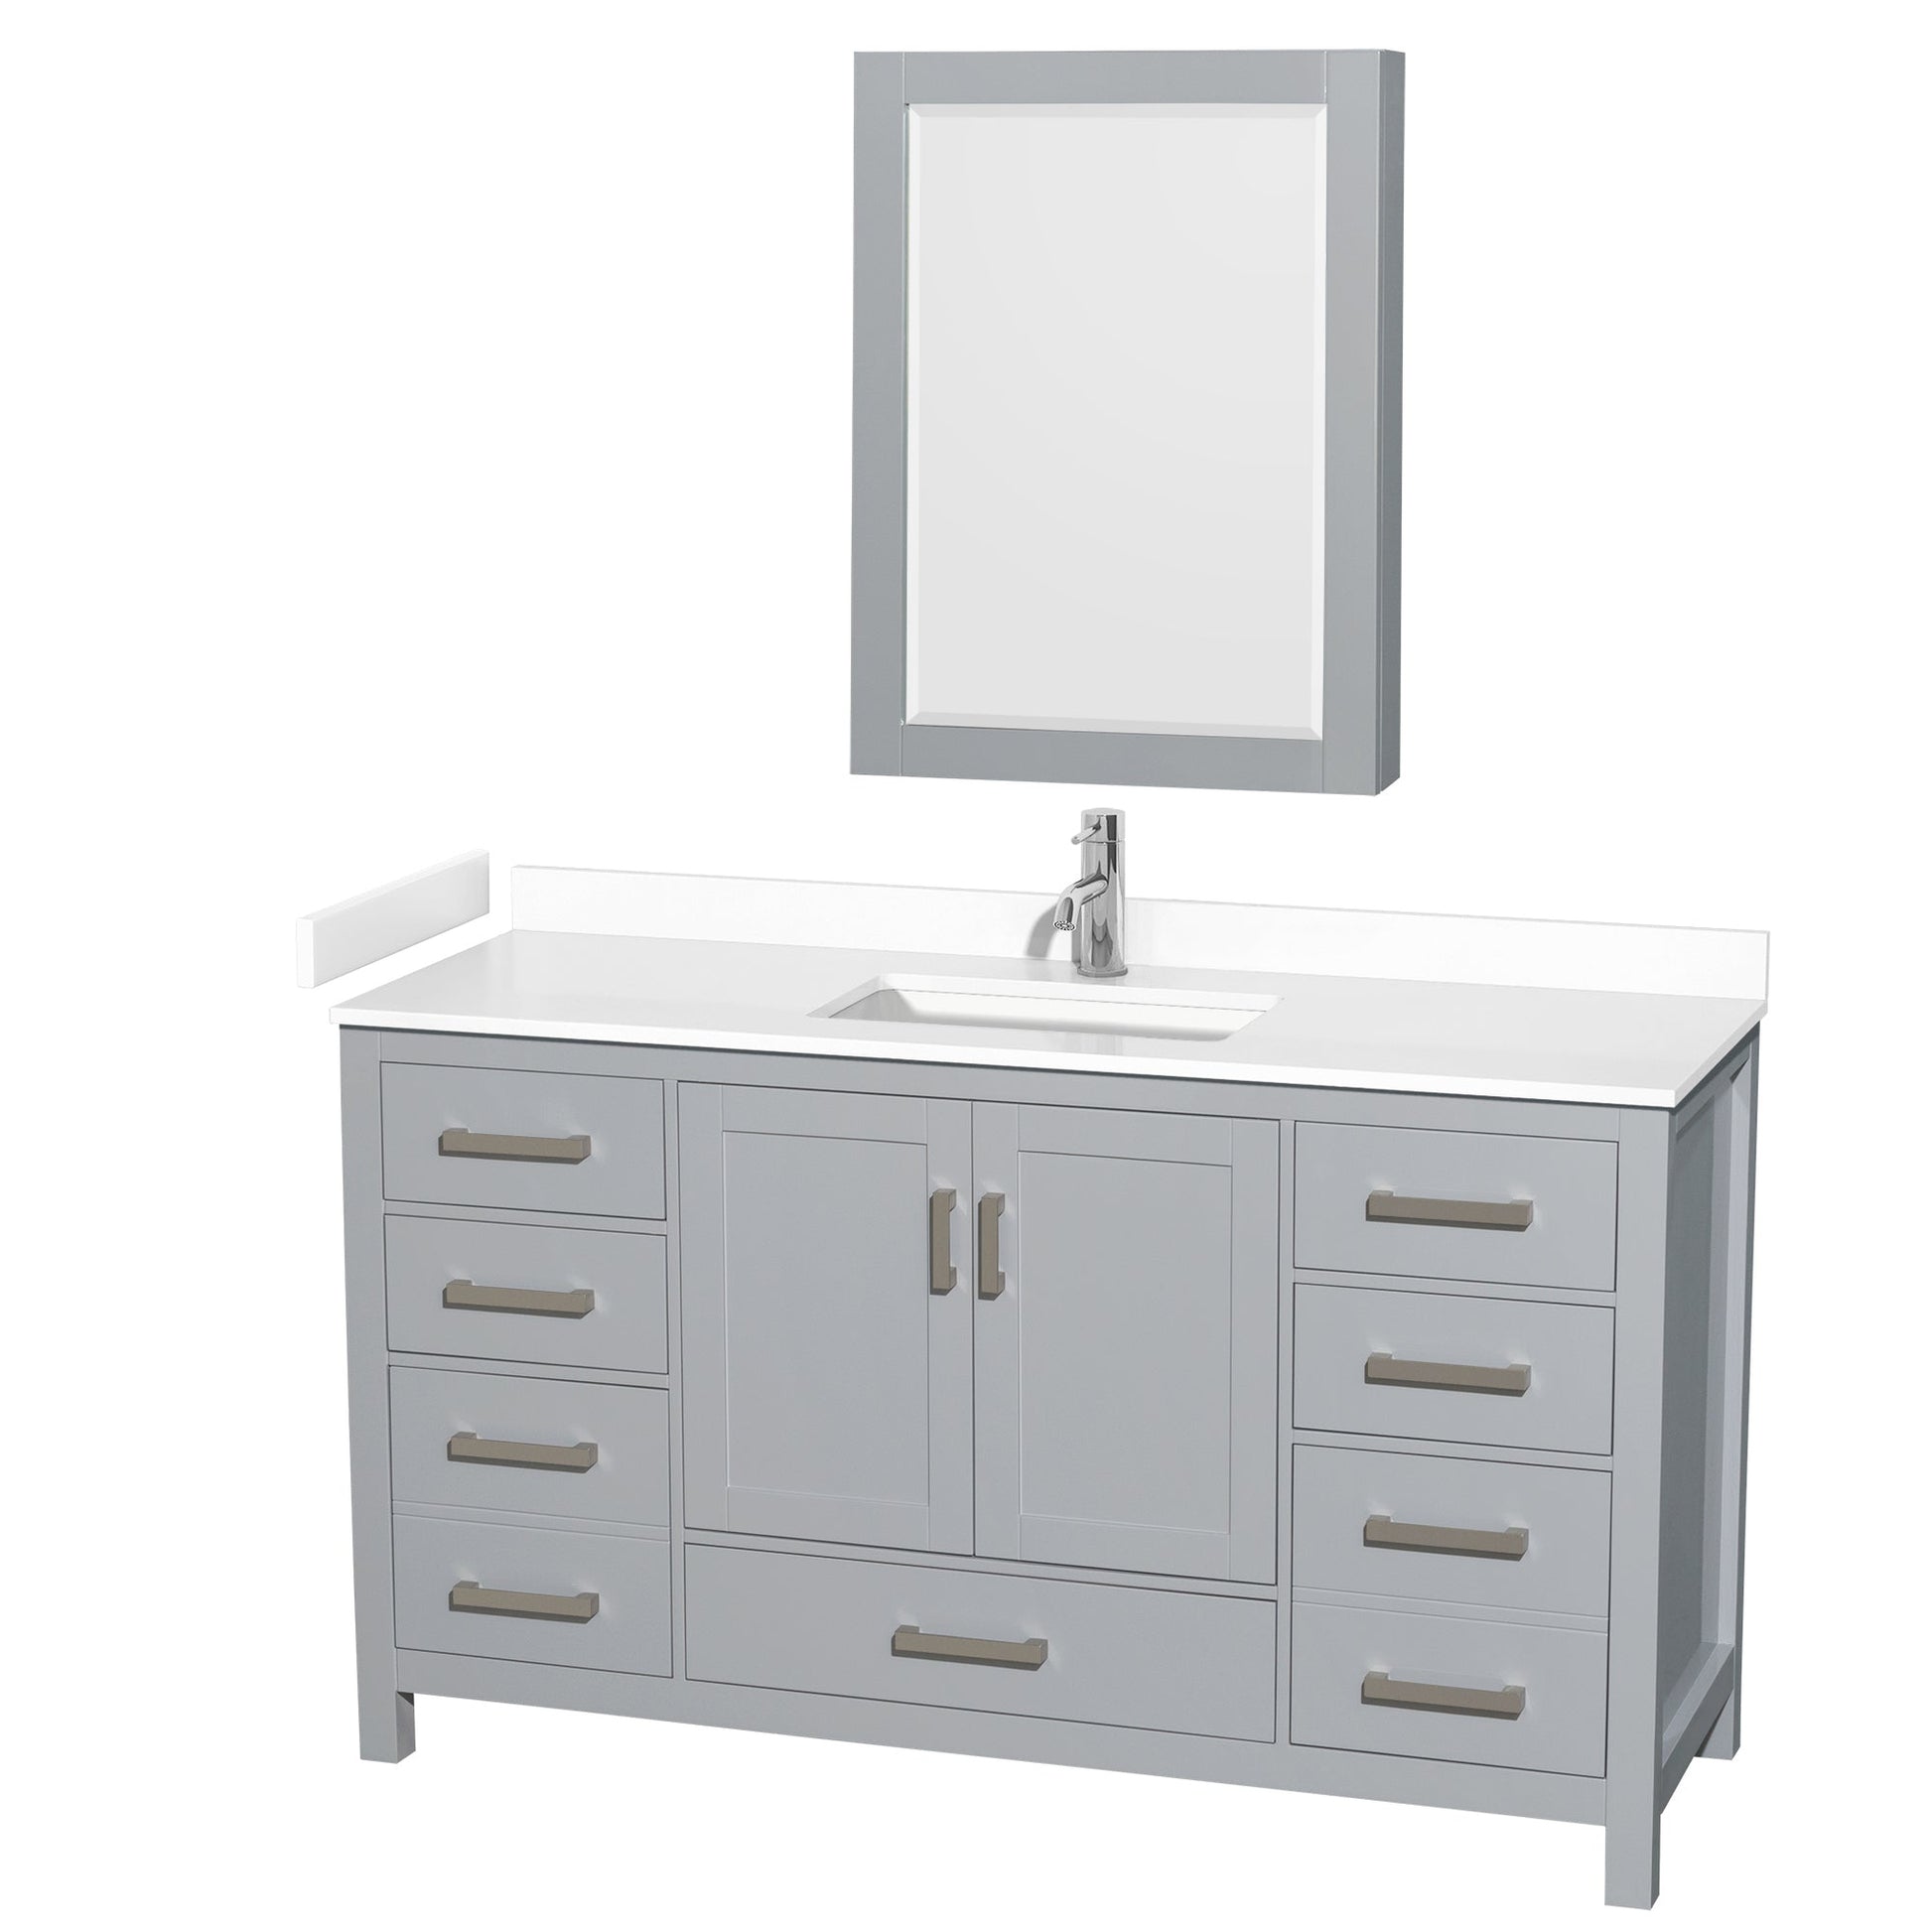 Wyndham Collection Sheffield 60" Single Bathroom Vanity in Gray, White Cultured Marble Countertop, Undermount Square Sink, Medicine Cabinet